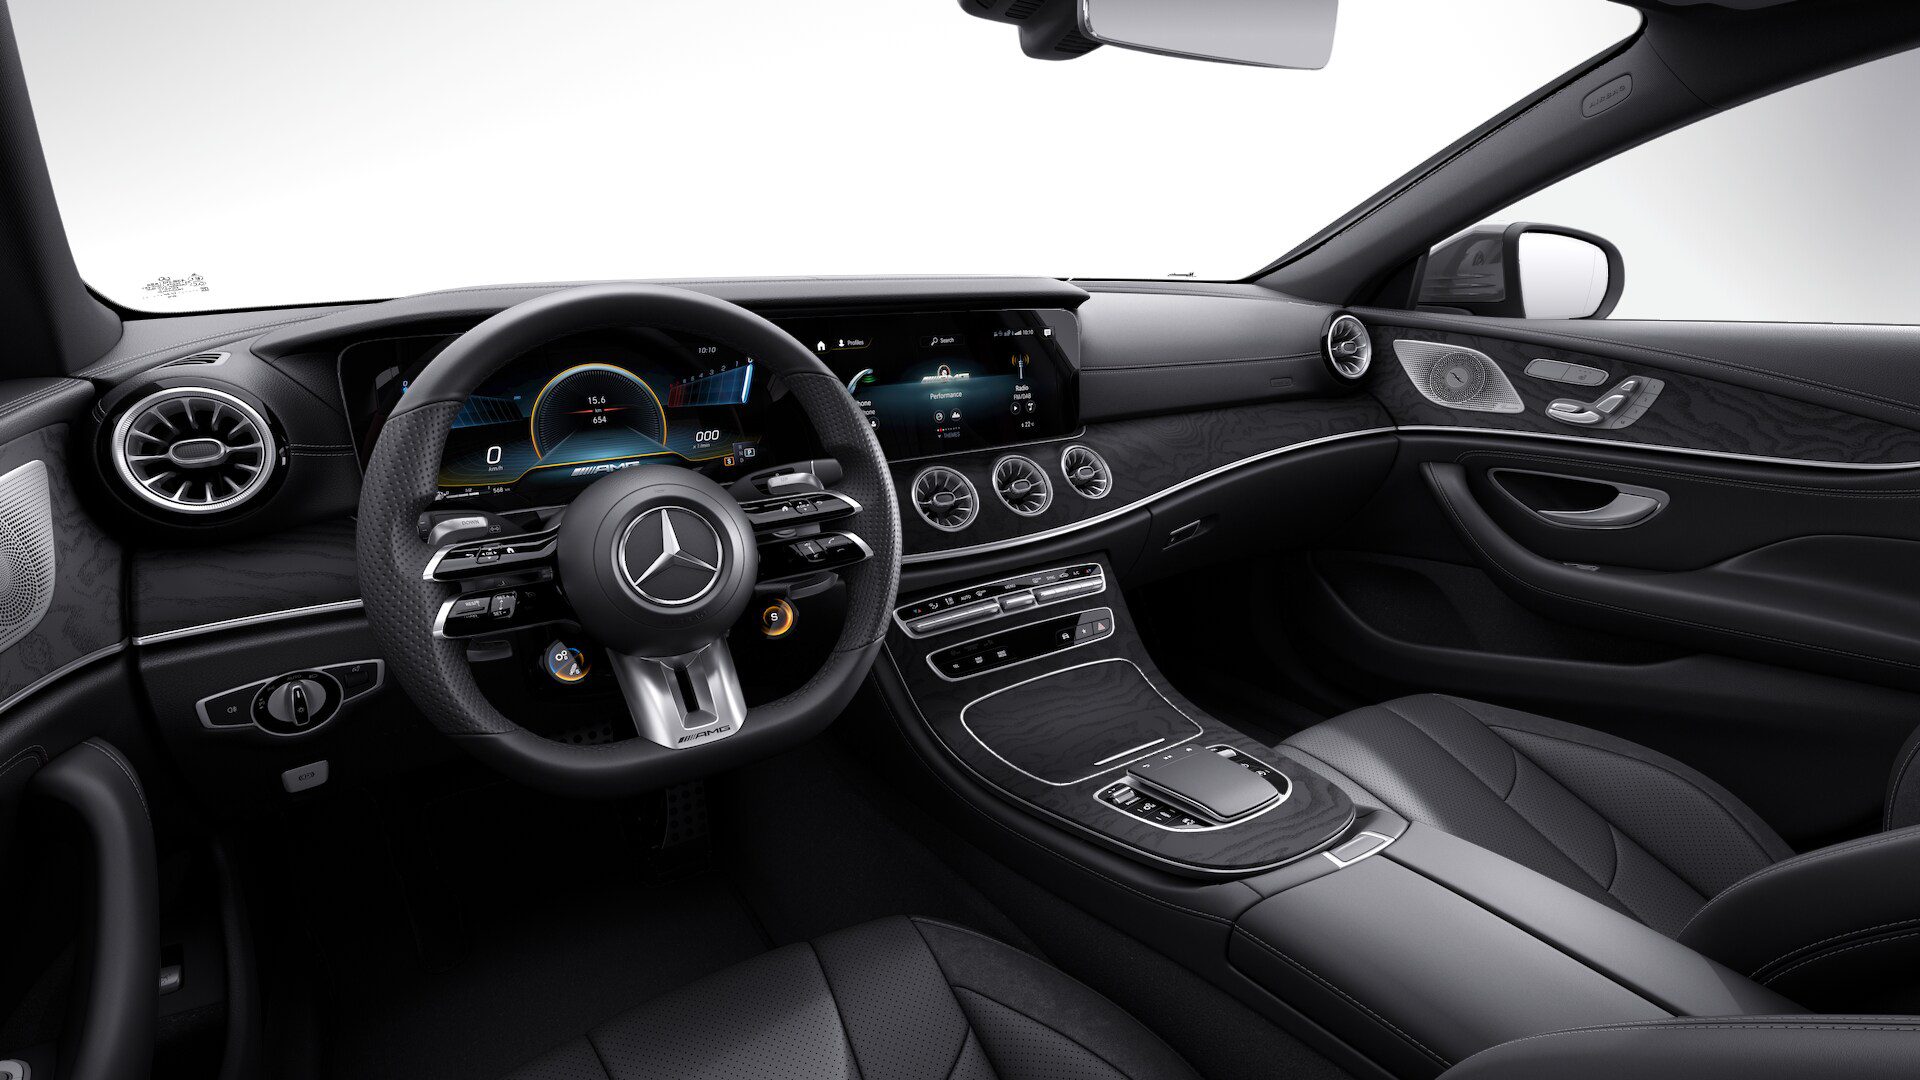 Interior of the Mercedes-AMG CLS53 4MATIC+